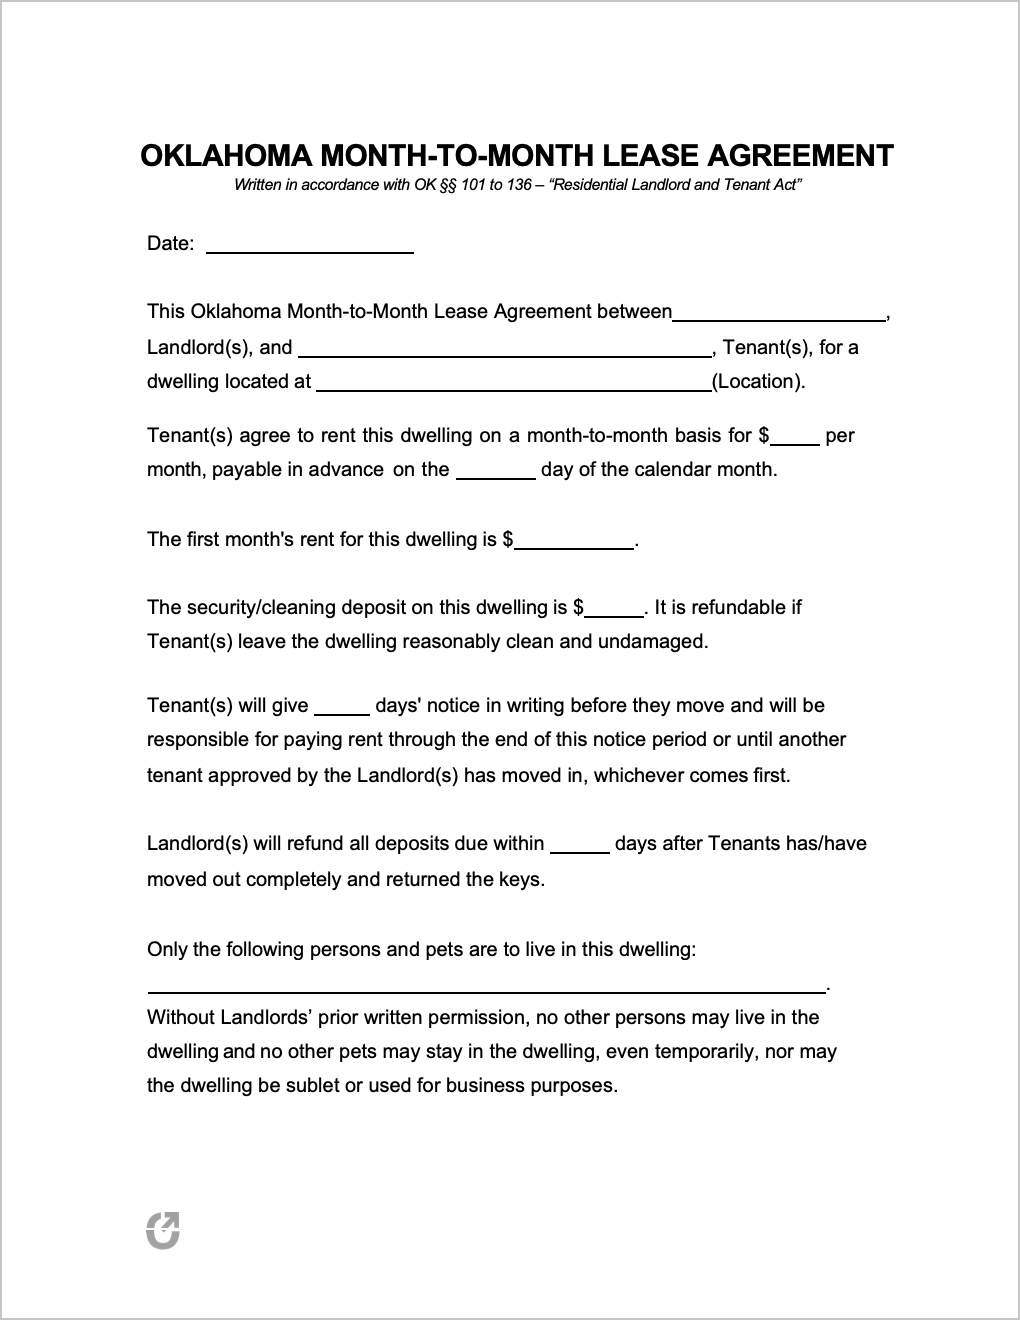 free-oklahoma-month-to-month-lease-agreement-pdf-word